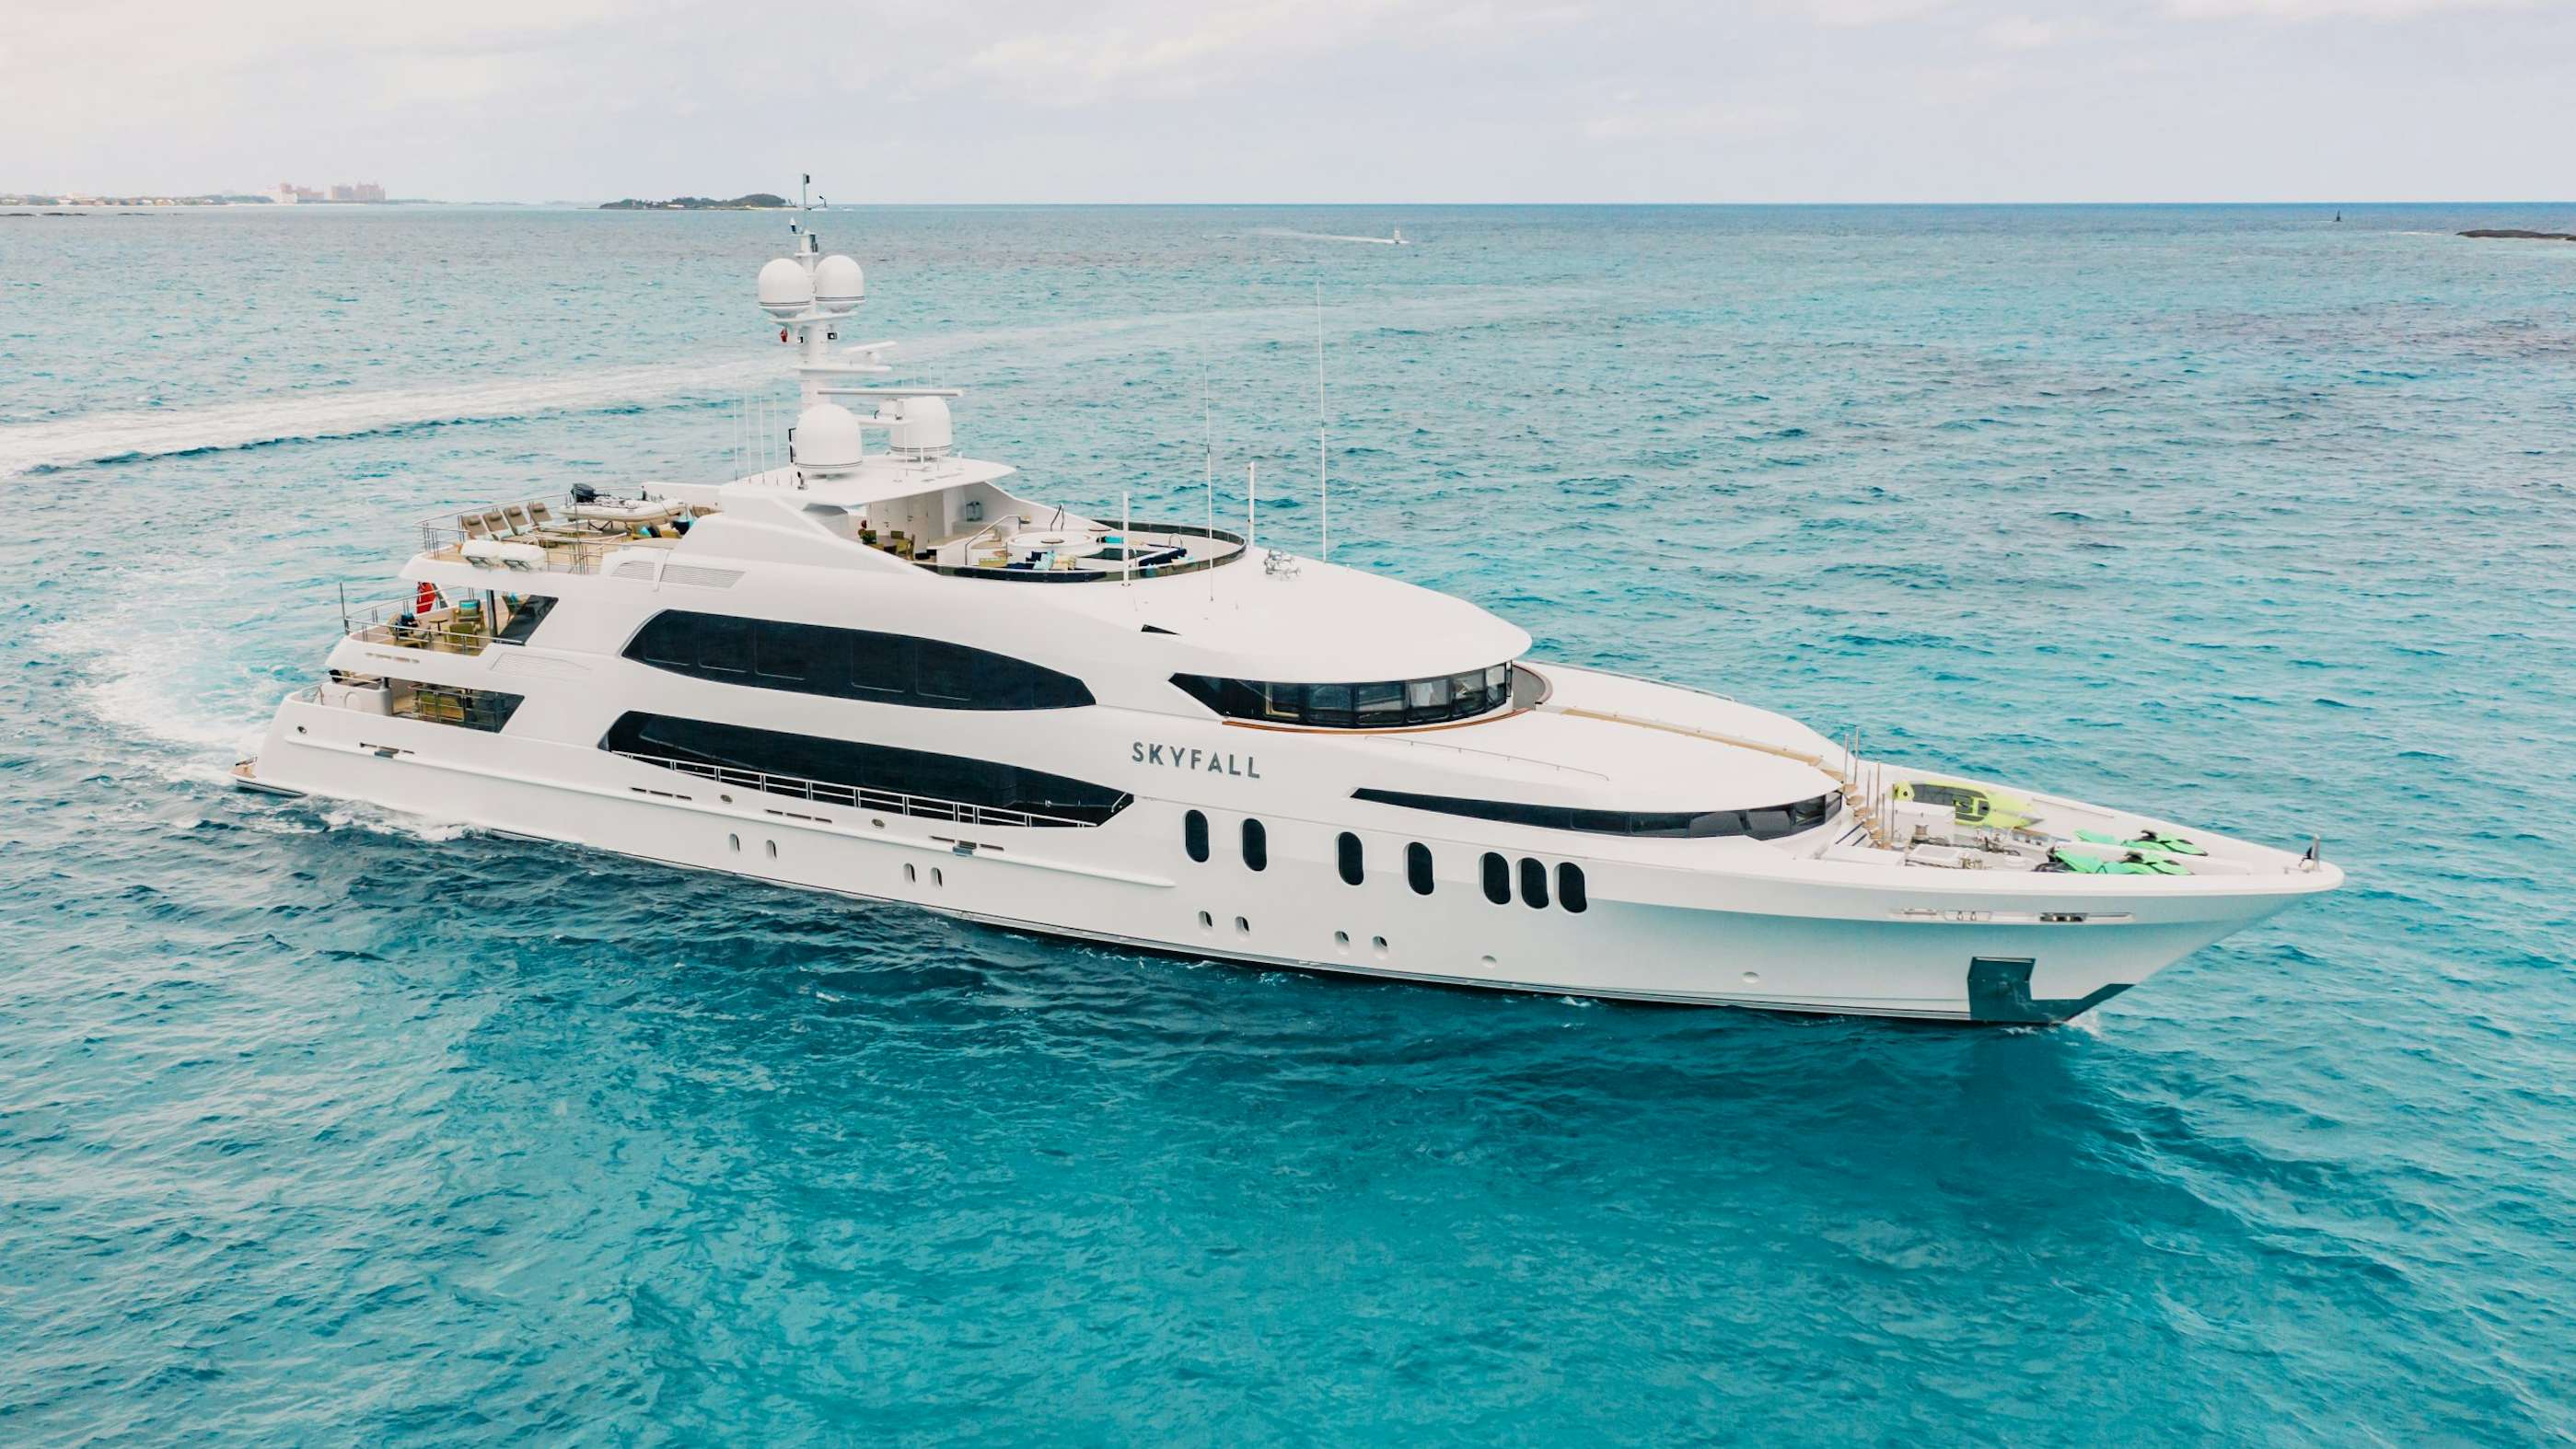 Watch Video for SKYFALL Yacht for Charter